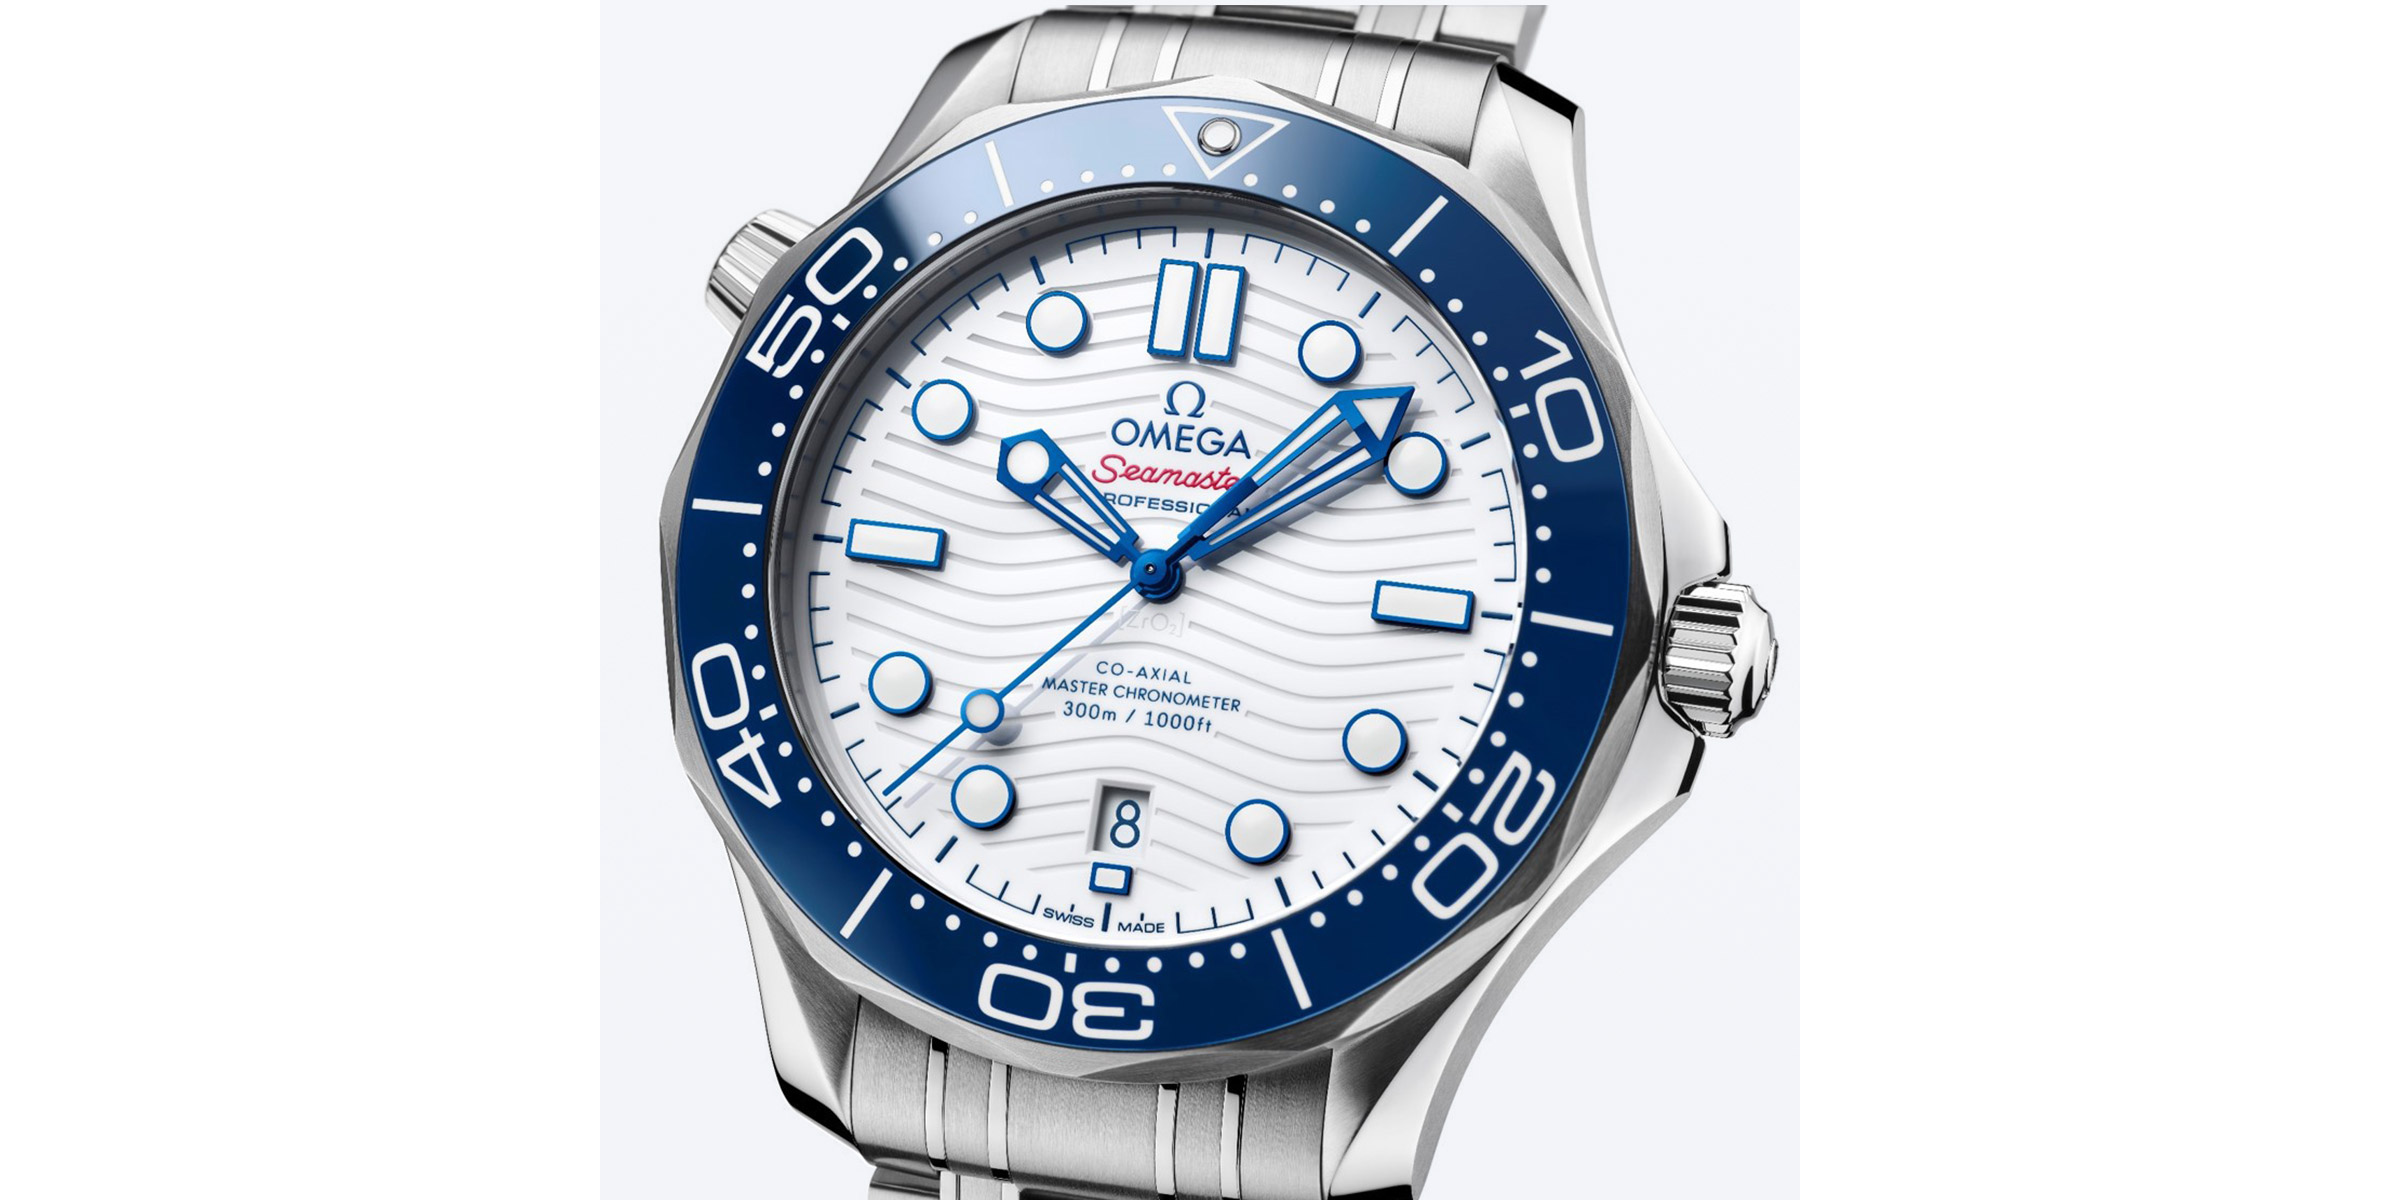 OMEGA & legendary Olympian Michael Phelps unveil a world-first in